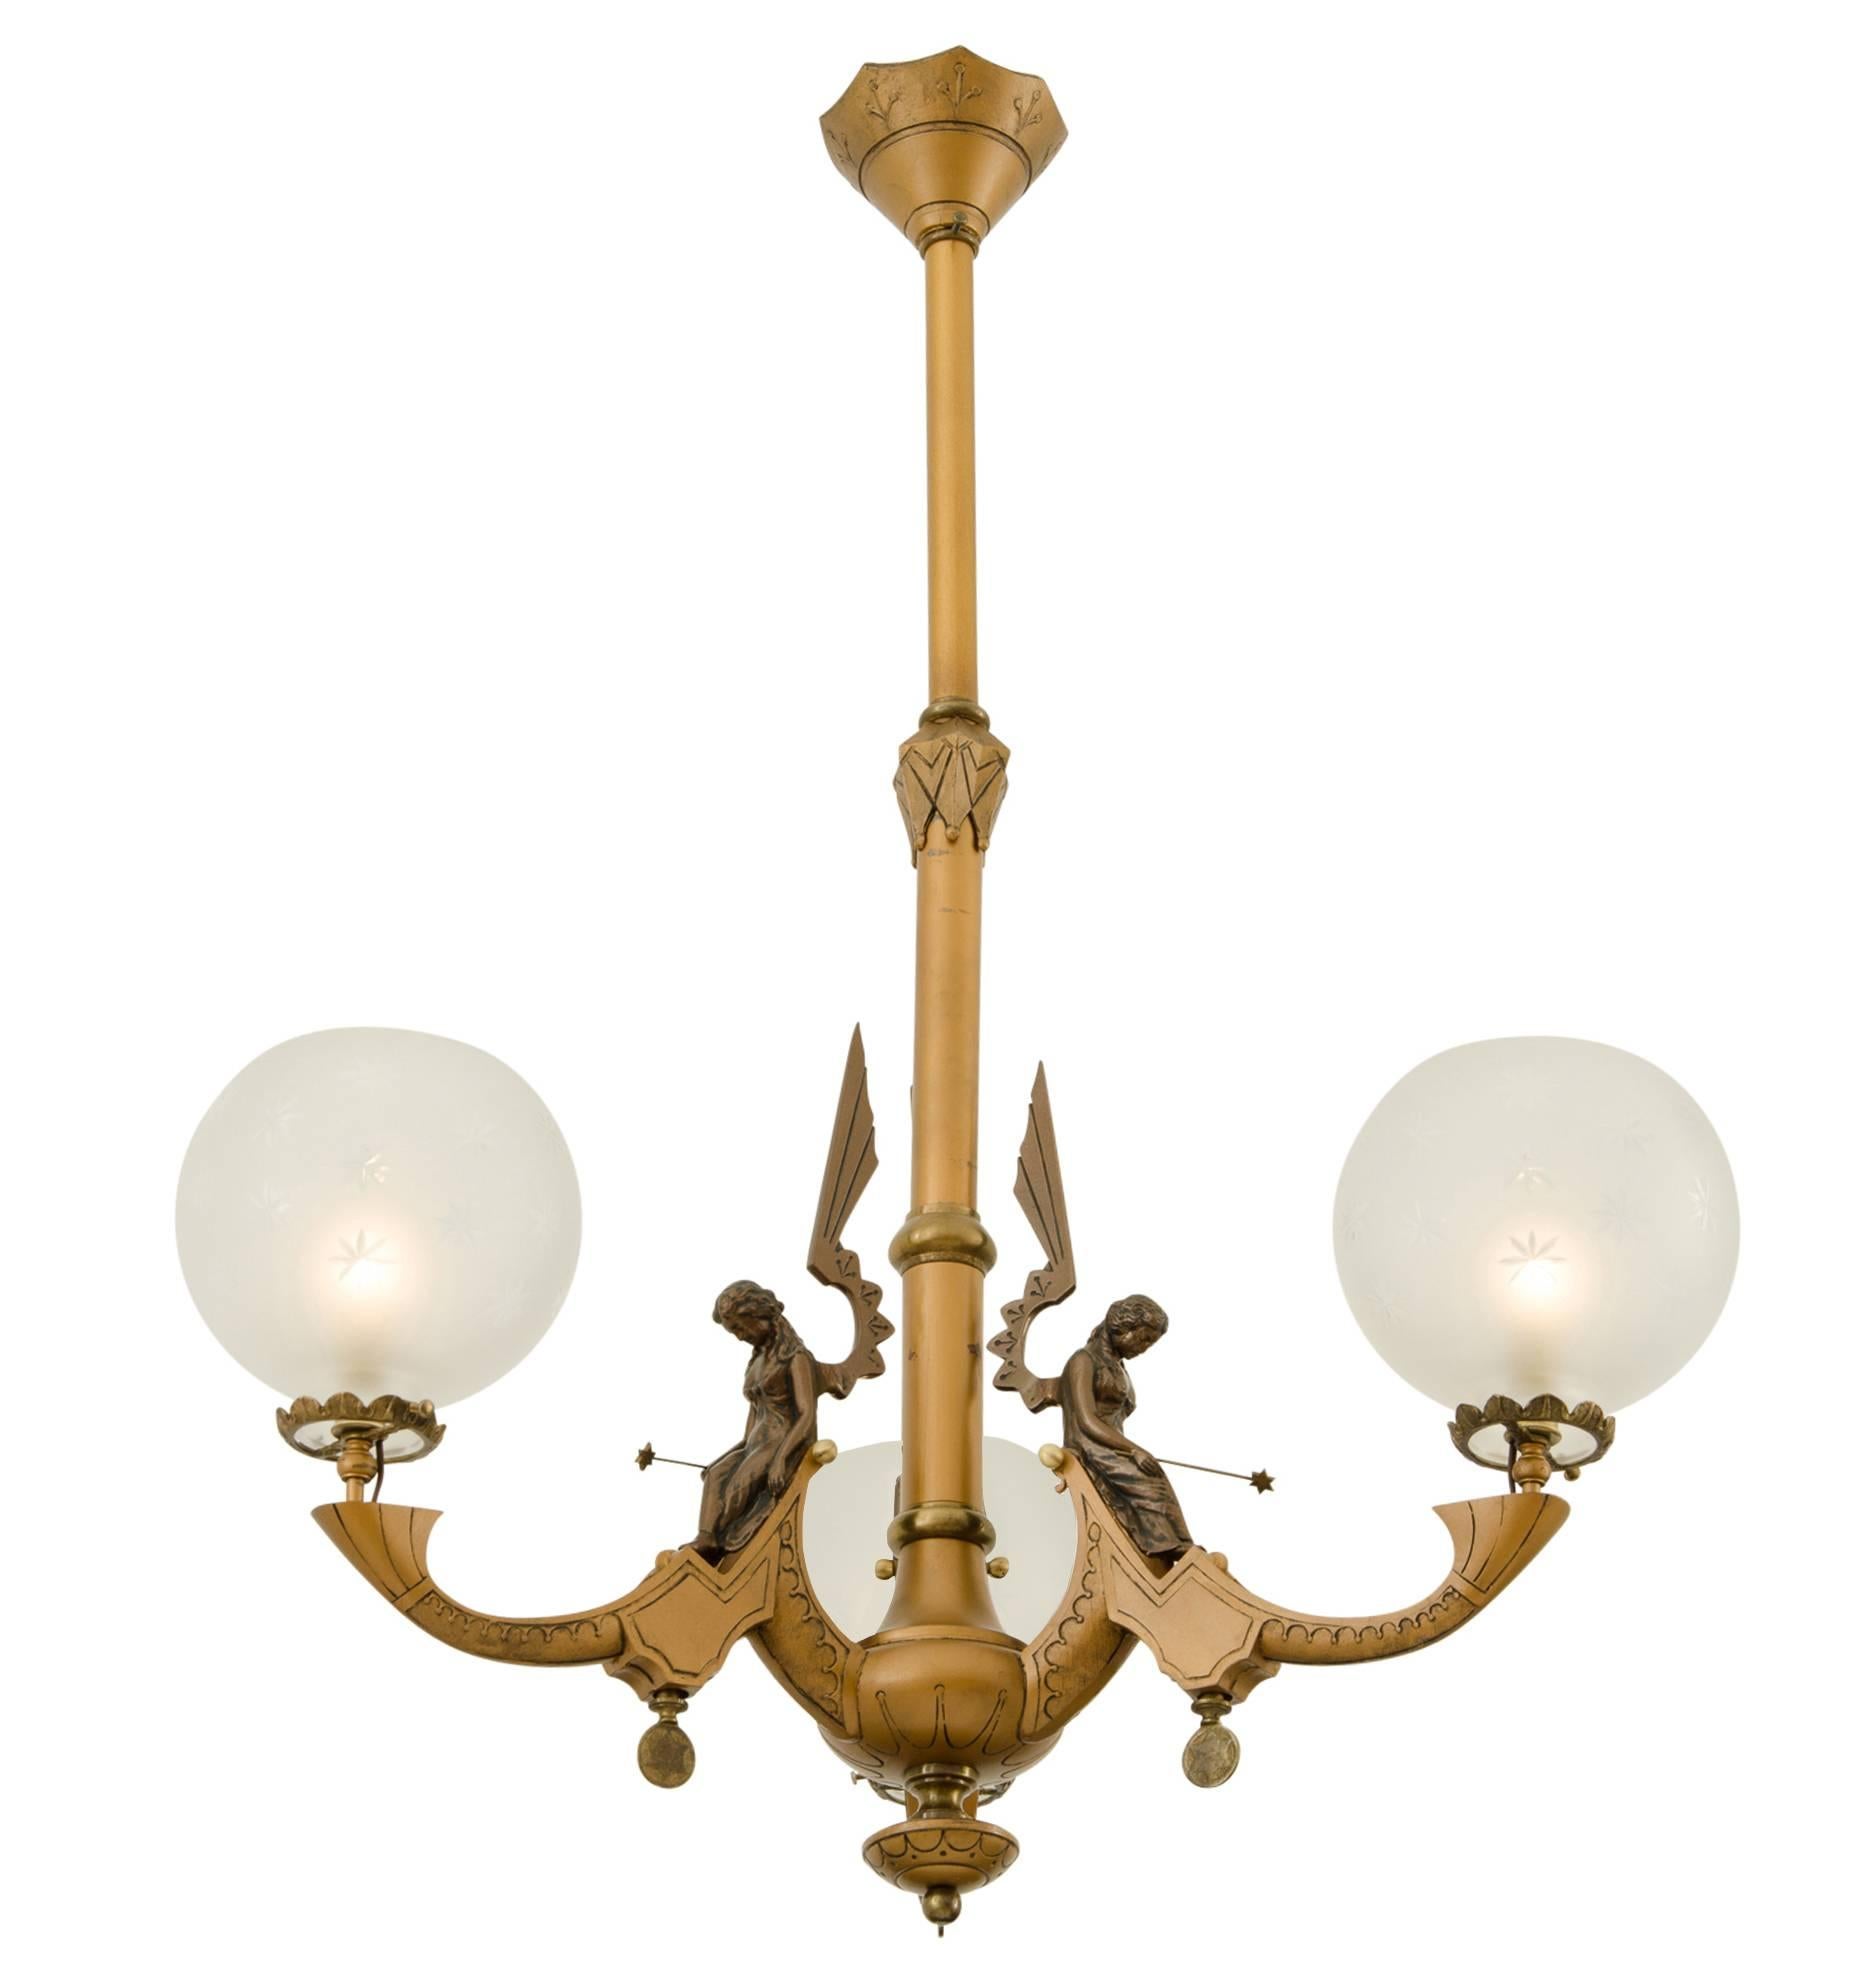 A rare and remarkable find, this three-light Neo-Grec chandelier is totally original, down to the etched wheel-cut shades, the original gold and bronze gilt finish and, best of all, the incredible cast bronze Fairies.

Figural ceiling fixtures are